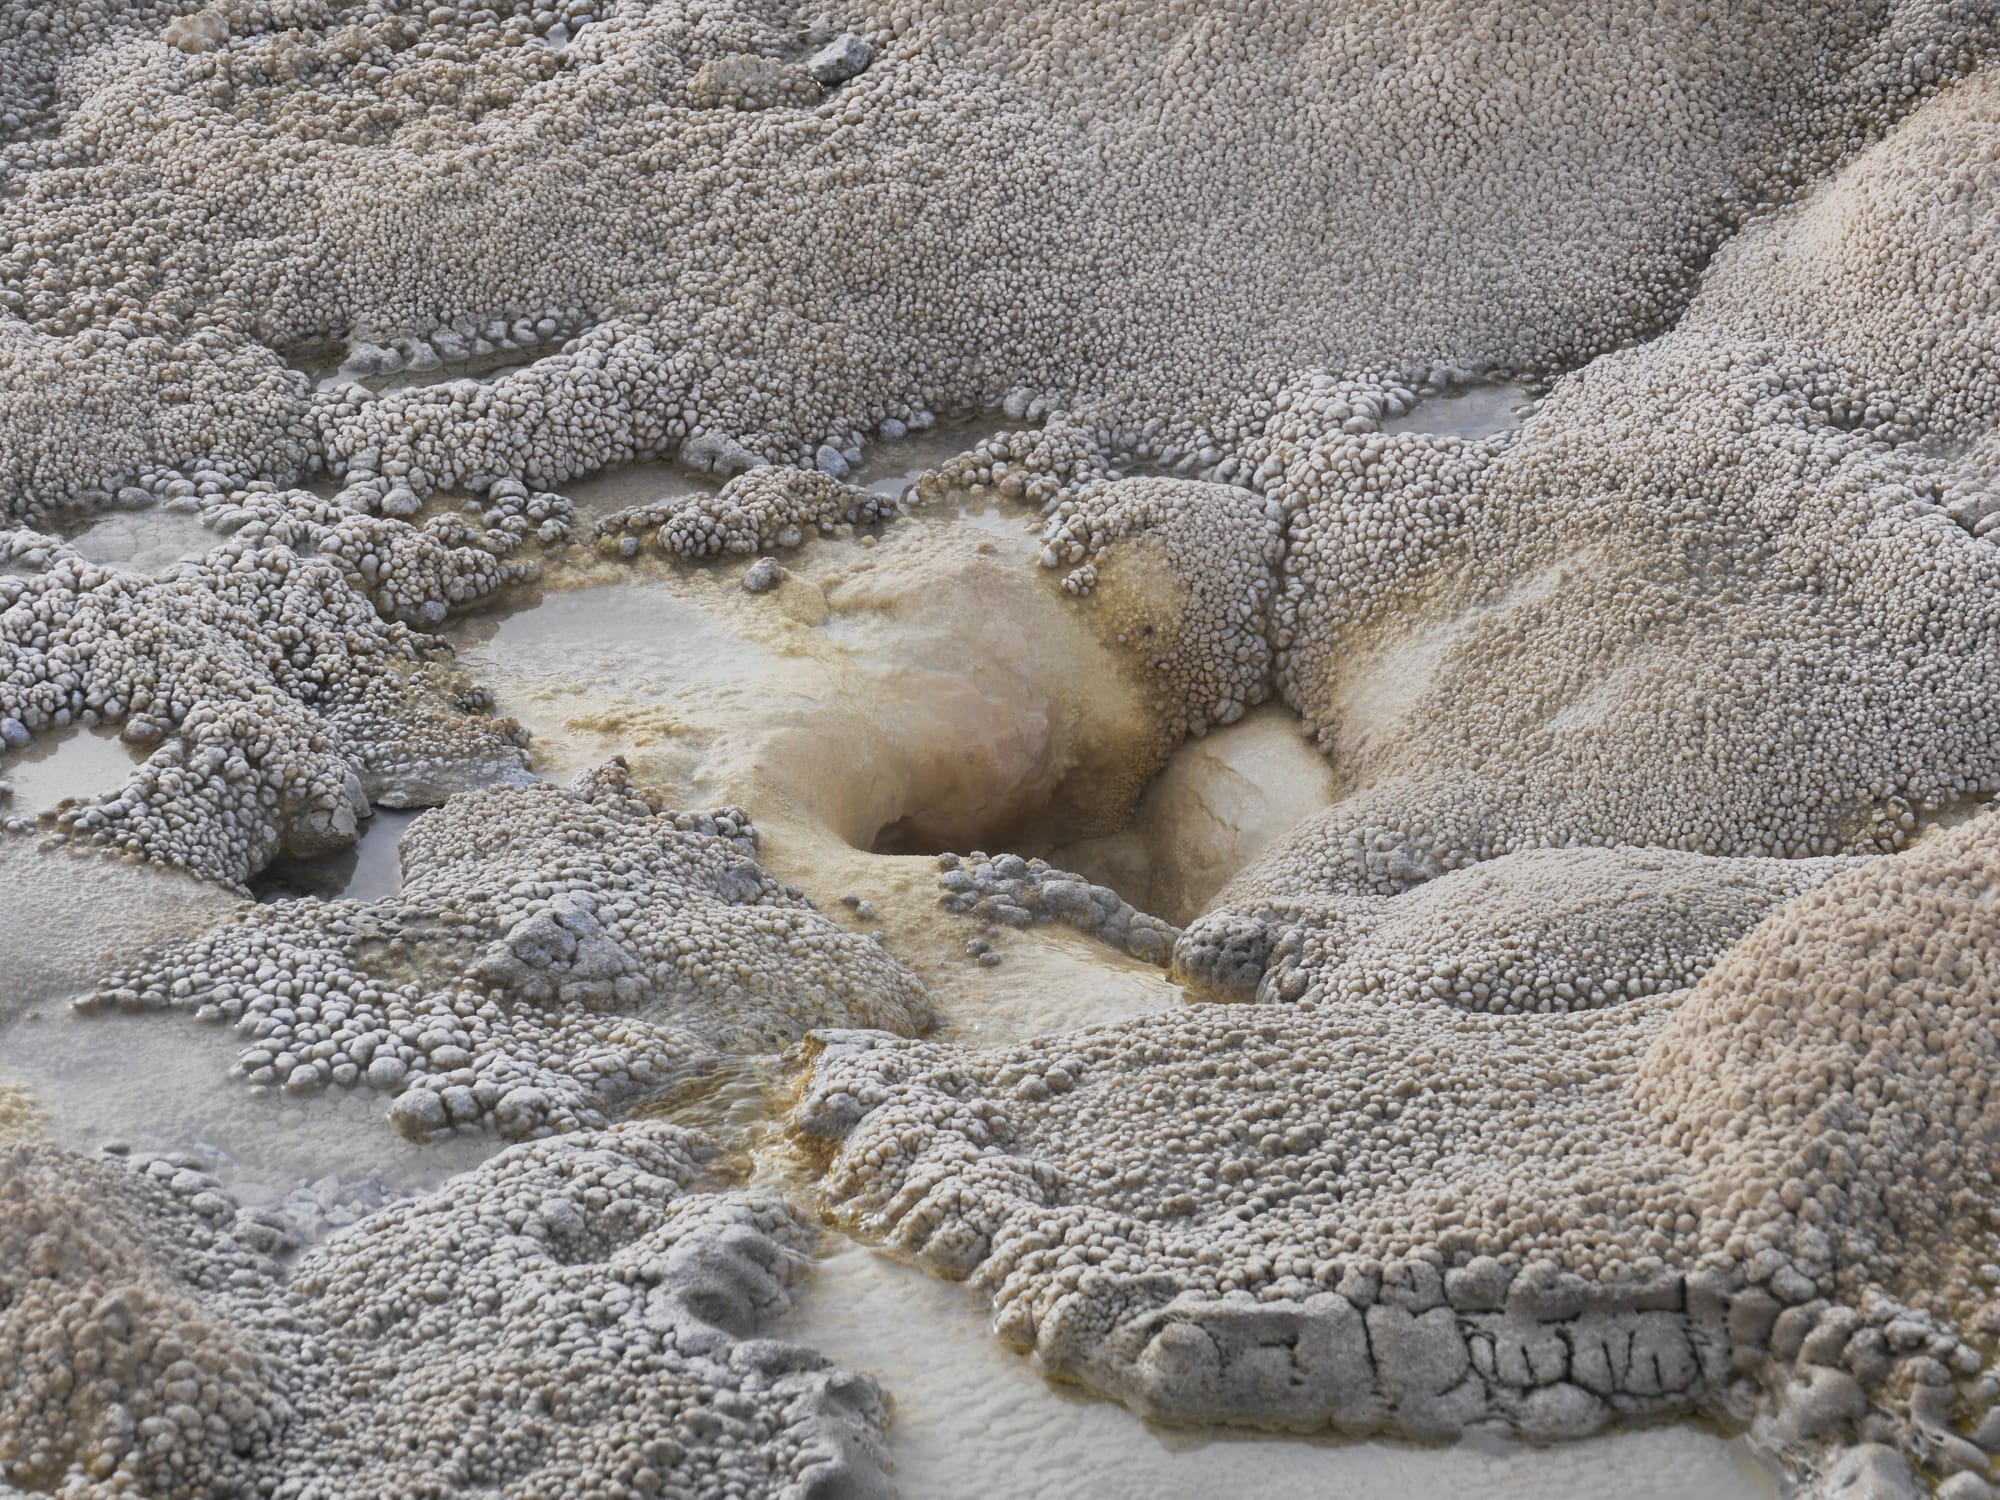 Photo by Author — snowshoe tour of the Upper Geyser Basin — precipitated rock formations